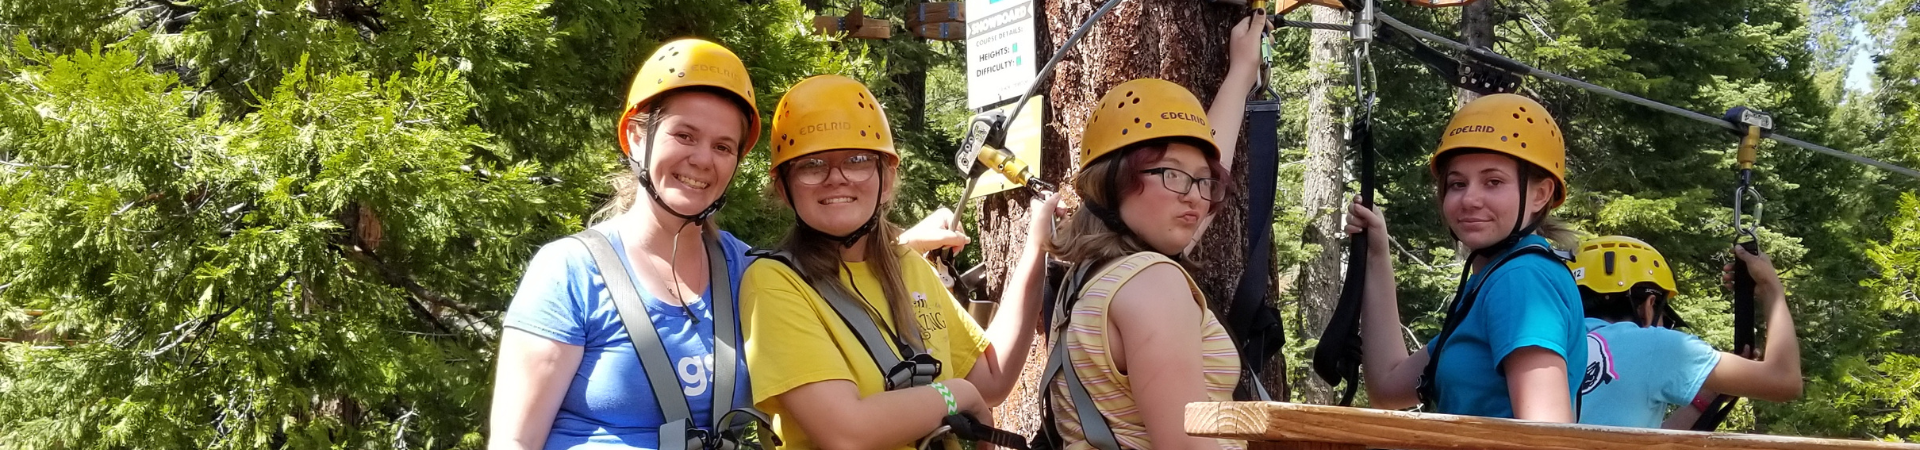  Girl Scouts wearing helmets on a high ropes course in the forest 